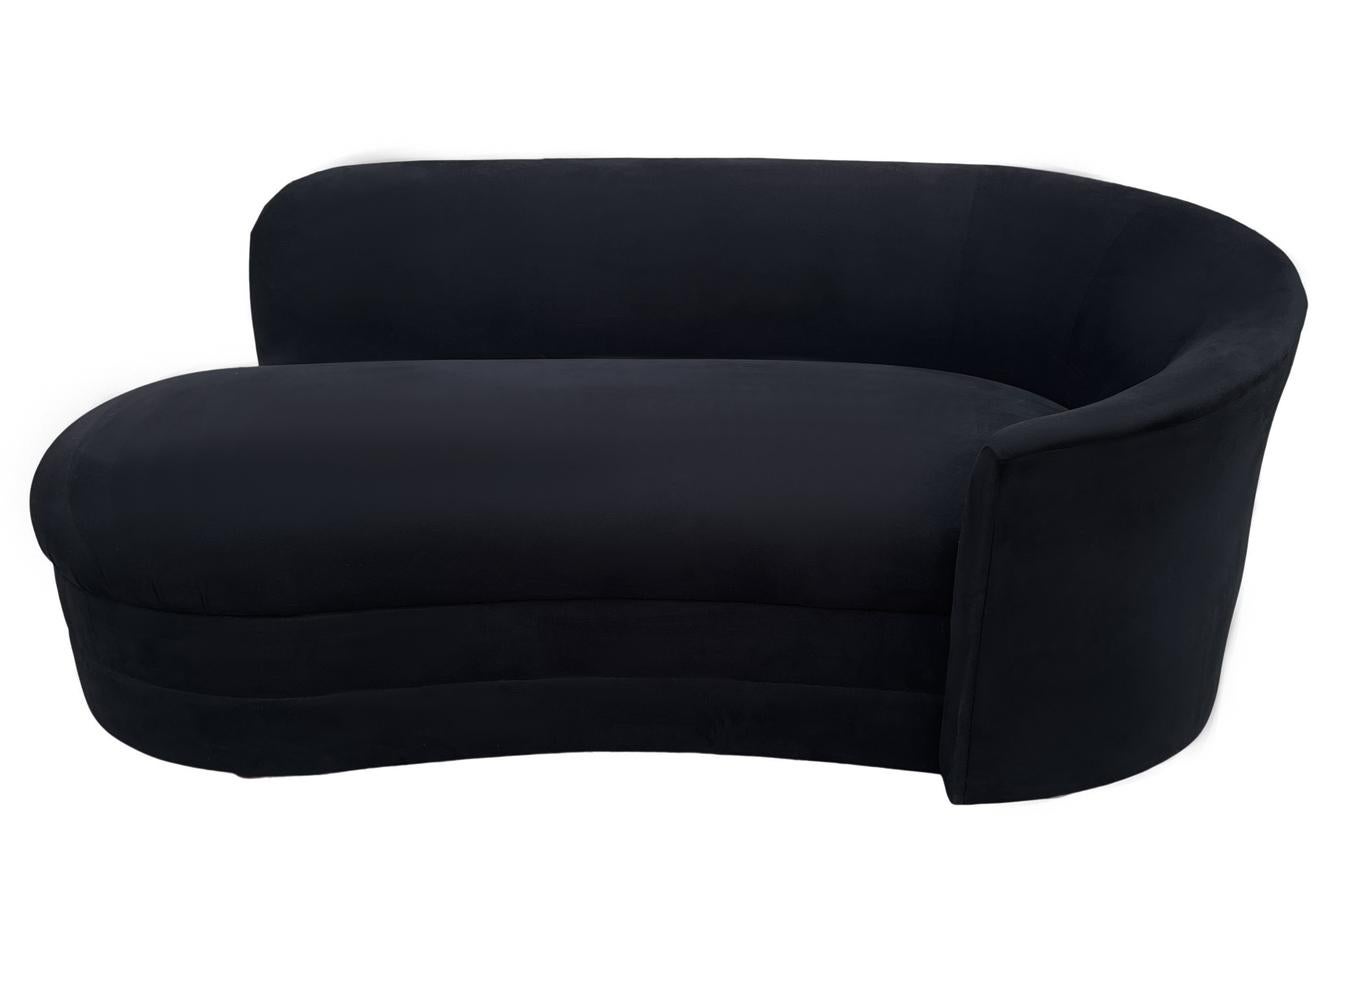 A sleek contemporary chaise lounge circa 1980's. This well made sofa retains its's original black velvet like upholstery. Its in very clean condition and usable as it is.